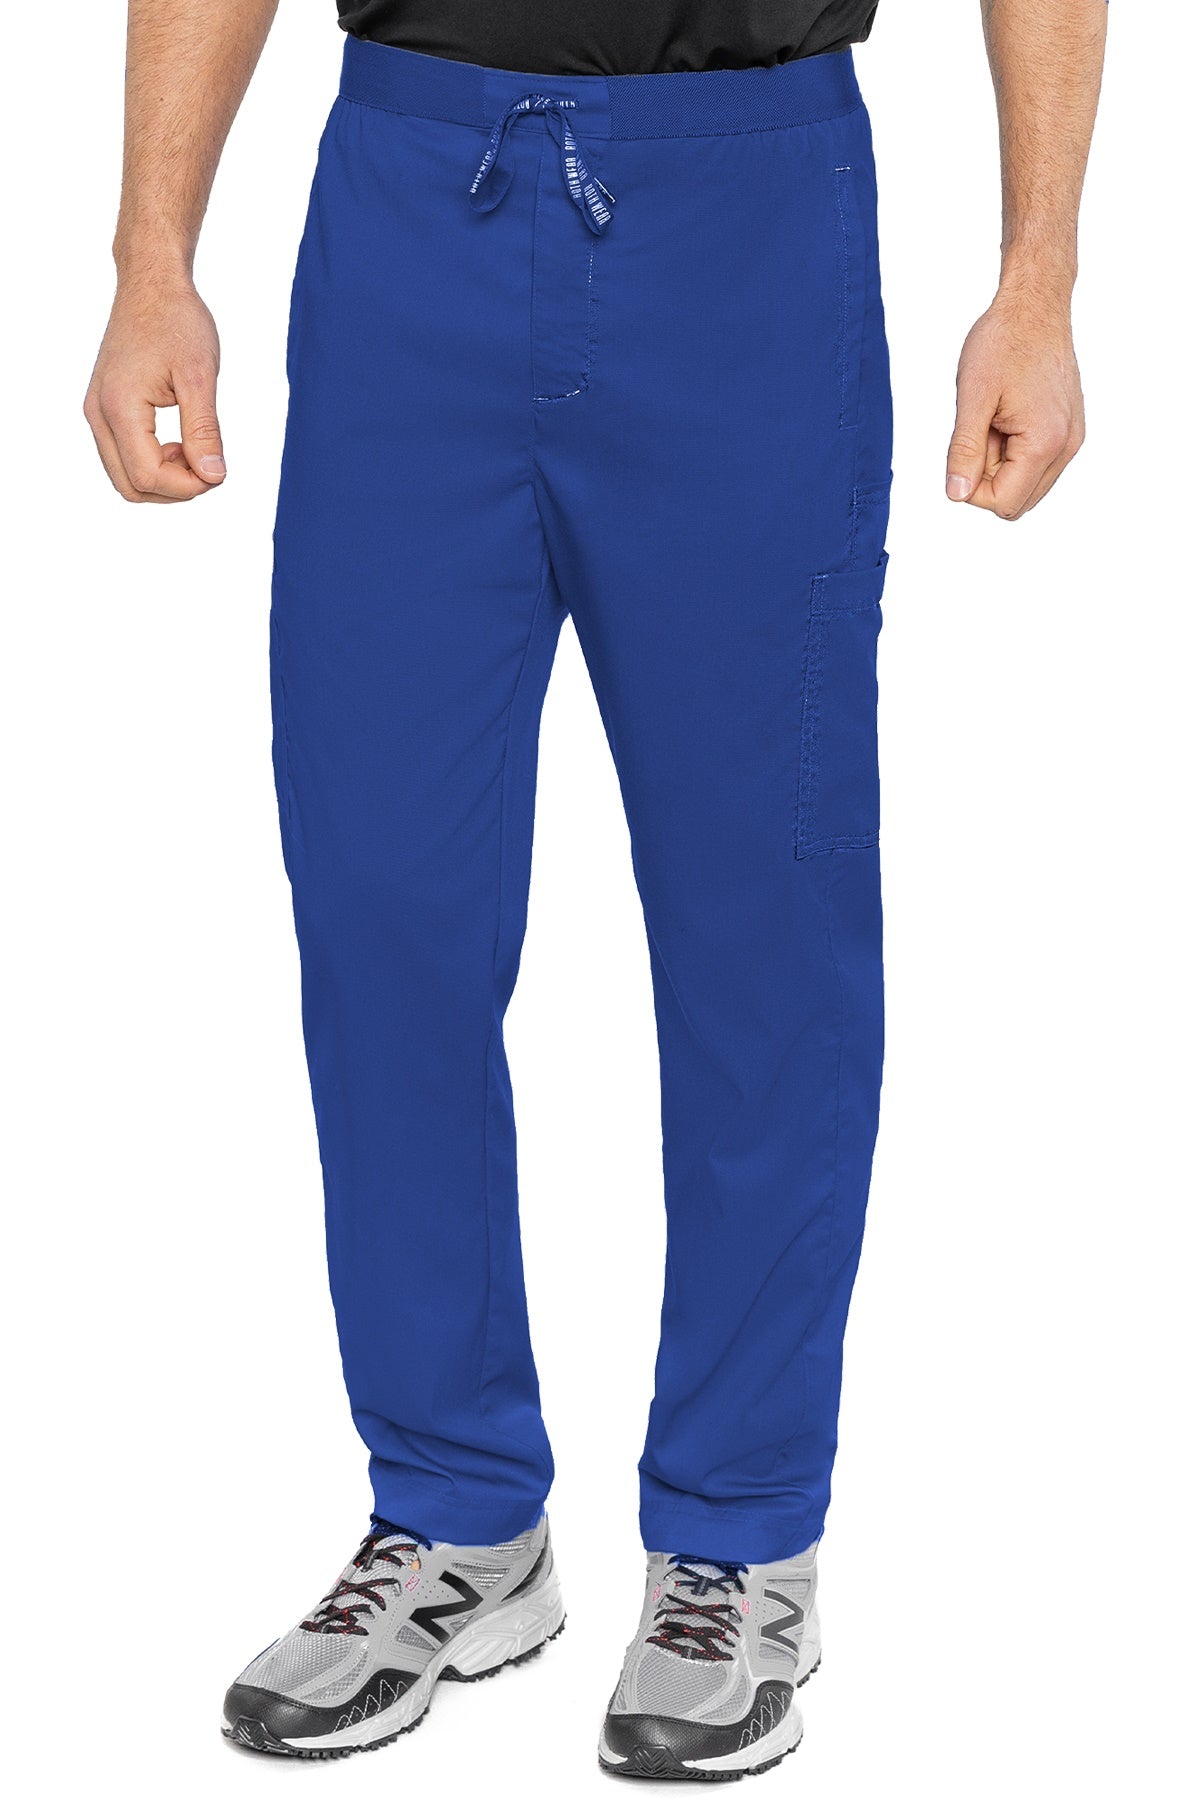 Med Couture Mens Scrub Pants RothWear Hutton Straight Leg in Royal at Parker's Clothing and Shoes.